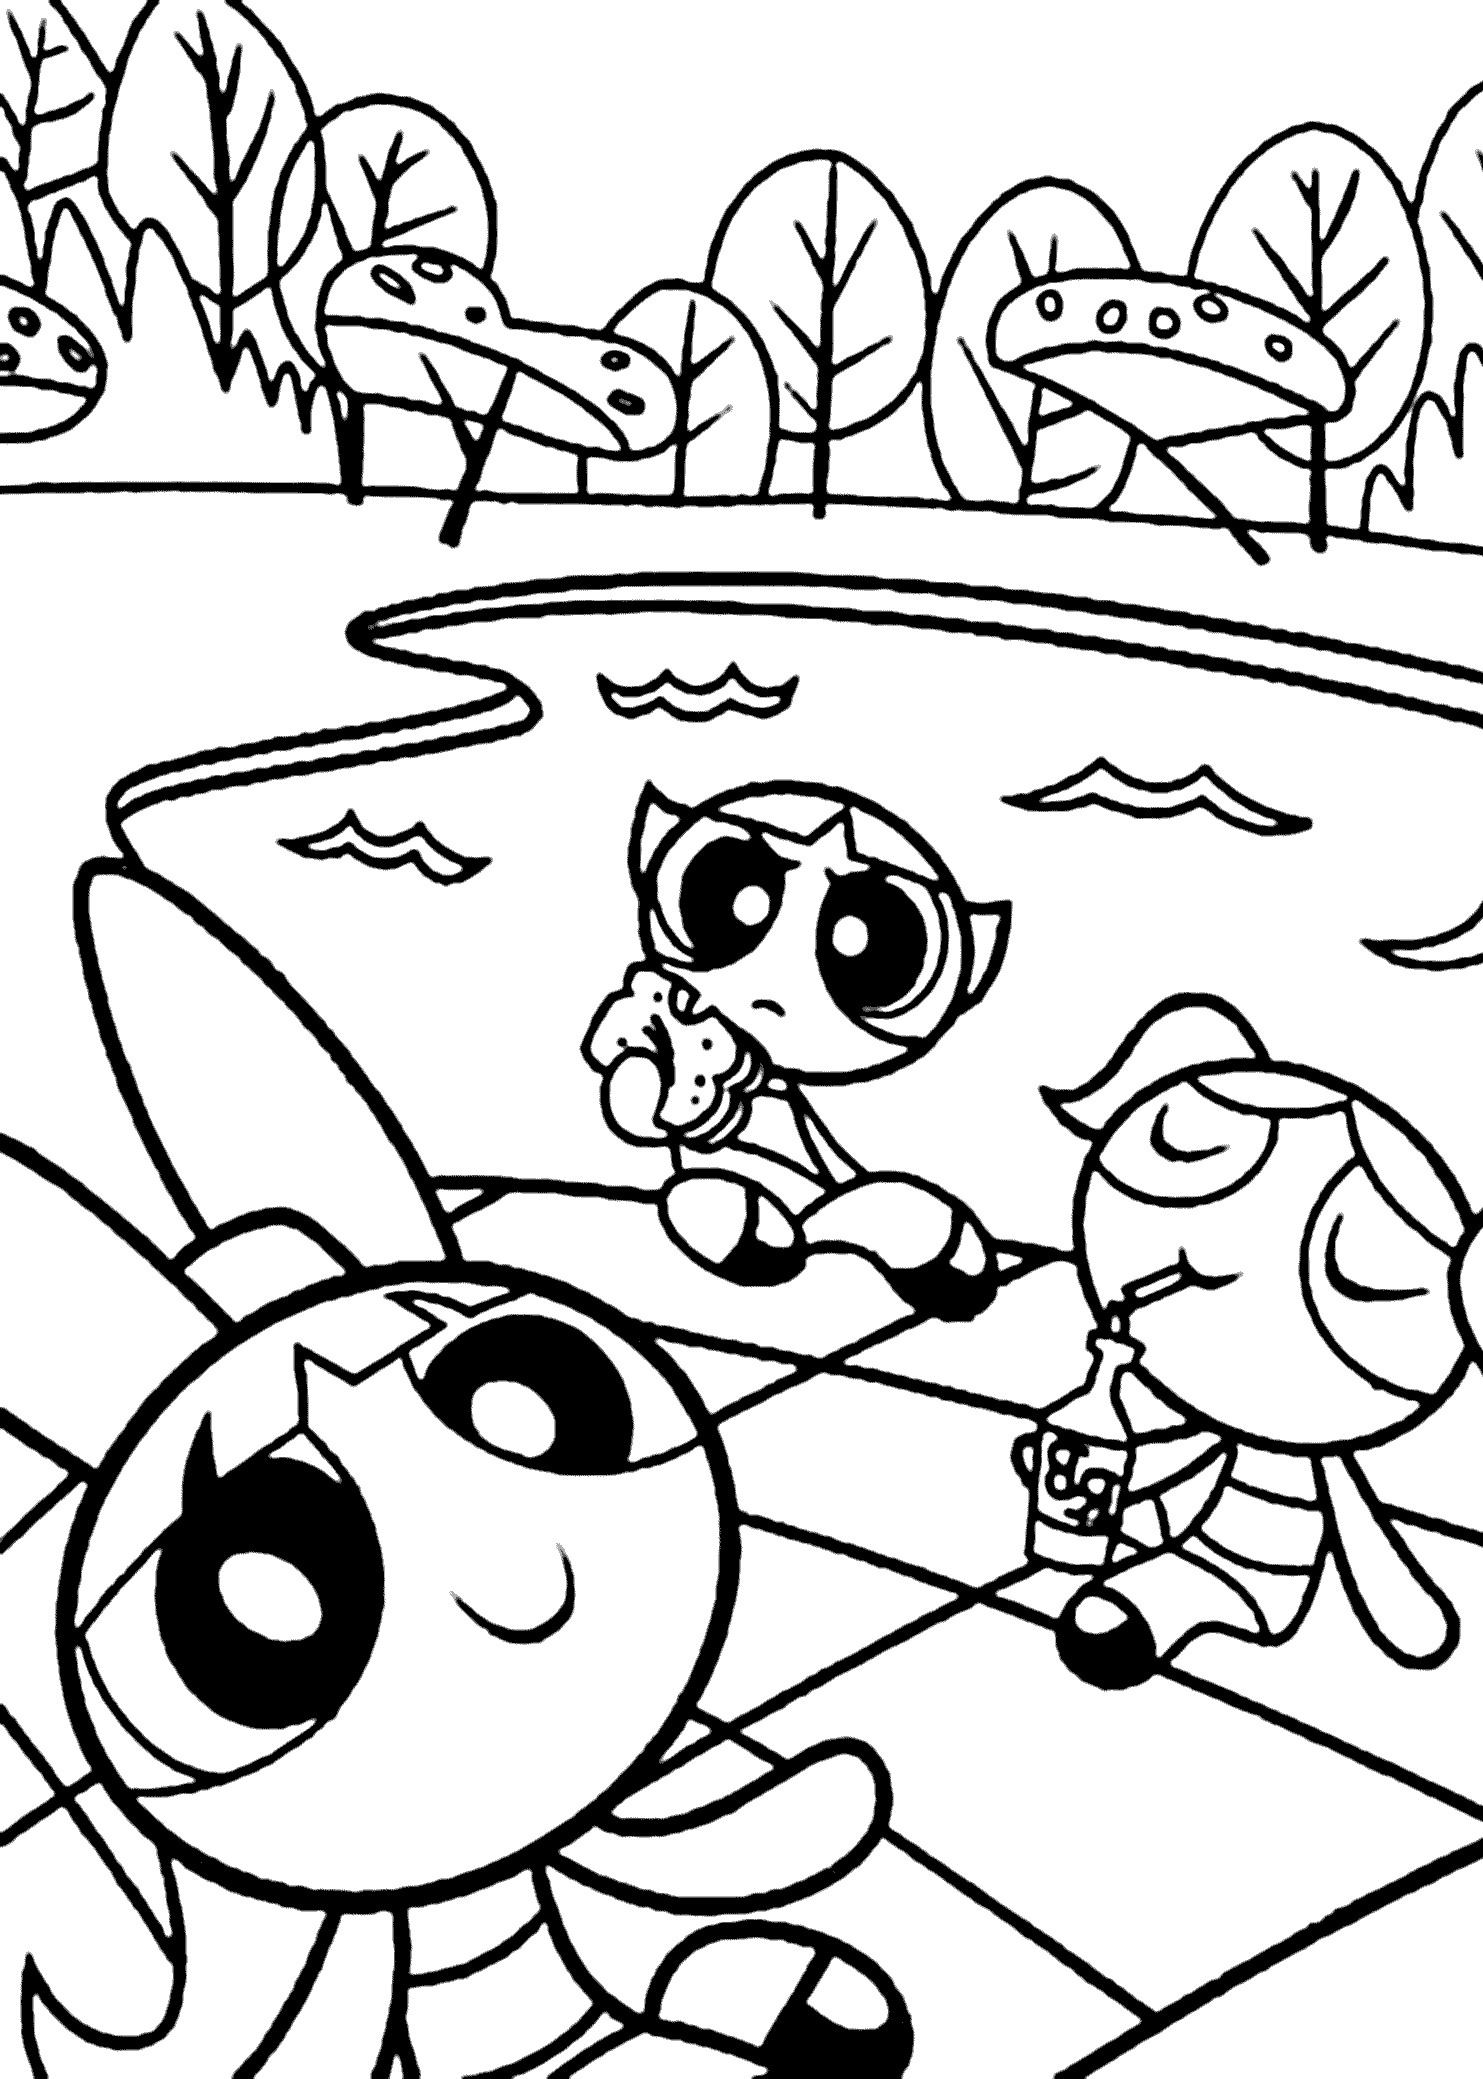 Powerpuff Girls Brothers Coloring Pages
 Power Puff Girls Z Coloring Pages Coloring Home